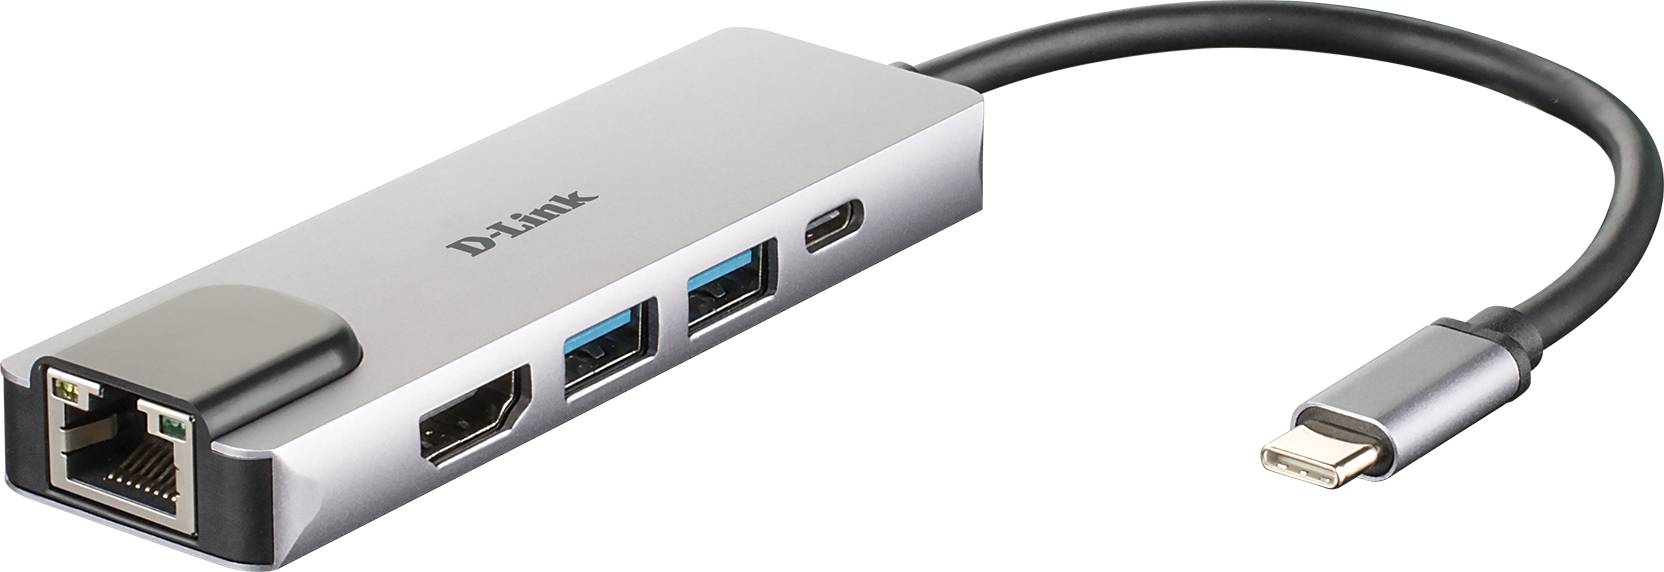 Rca Informatique - Image du produit : 5-IN-1 USB-C HUB WITH HDMI ETHERNET AND POWER DELIVERY